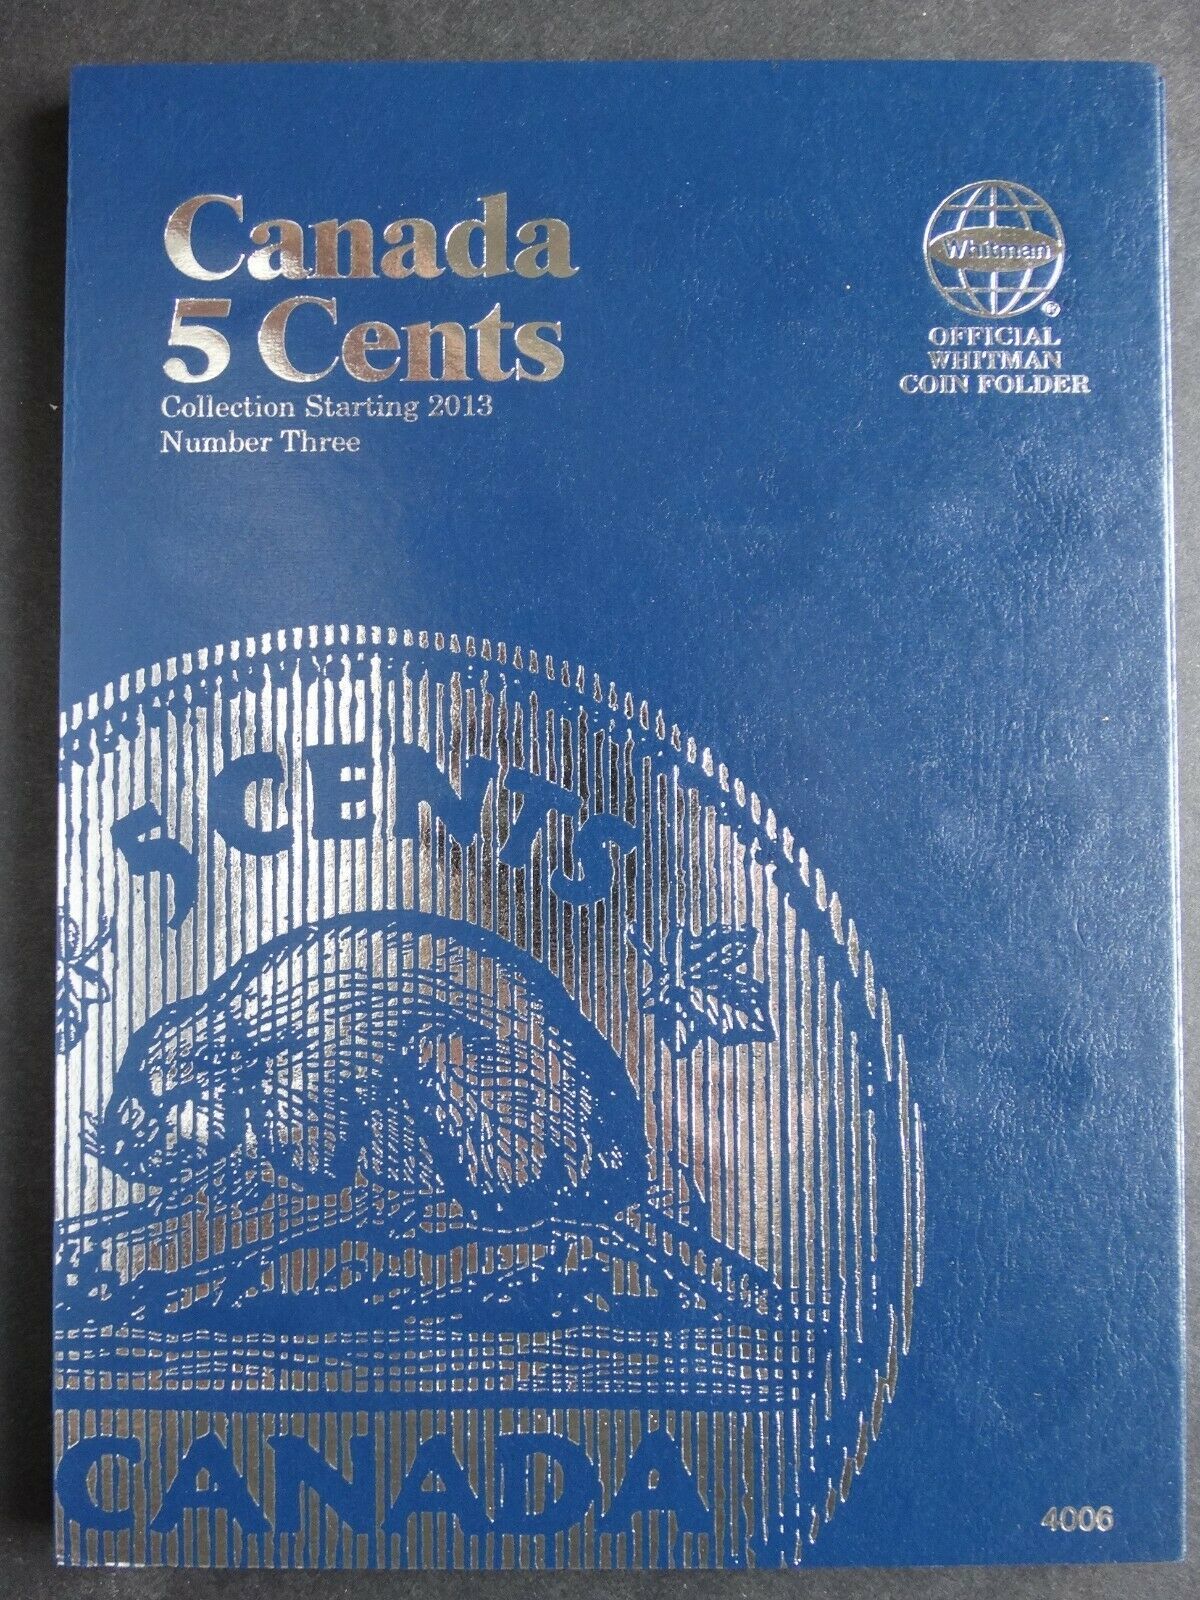 Primary image for Whitman Canada 5 Cents Coin Folder Starting 2013 Number 3 Album Book 4006